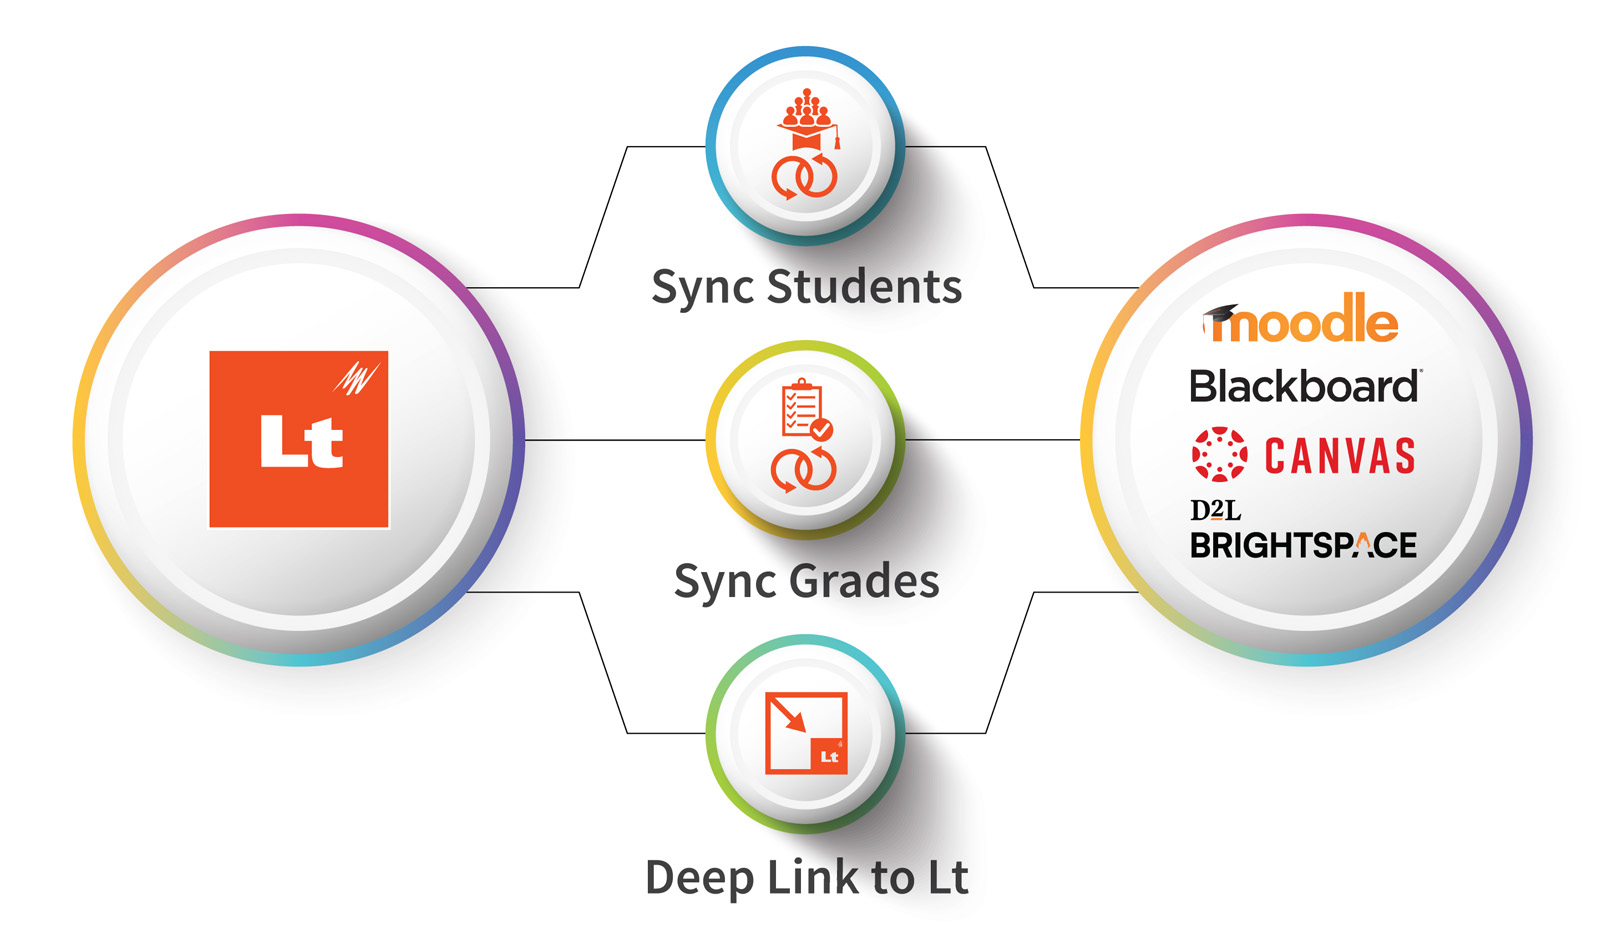 A diagram showing the relationship between Lt (circle on left) and the LMSs Moodle, Blackboard, Canvas, and D2L Brightspace (circle on right). Three lines connect these two circles. The lines say "Sync Students", "Sync Grades", and "Deep Link to Lt".